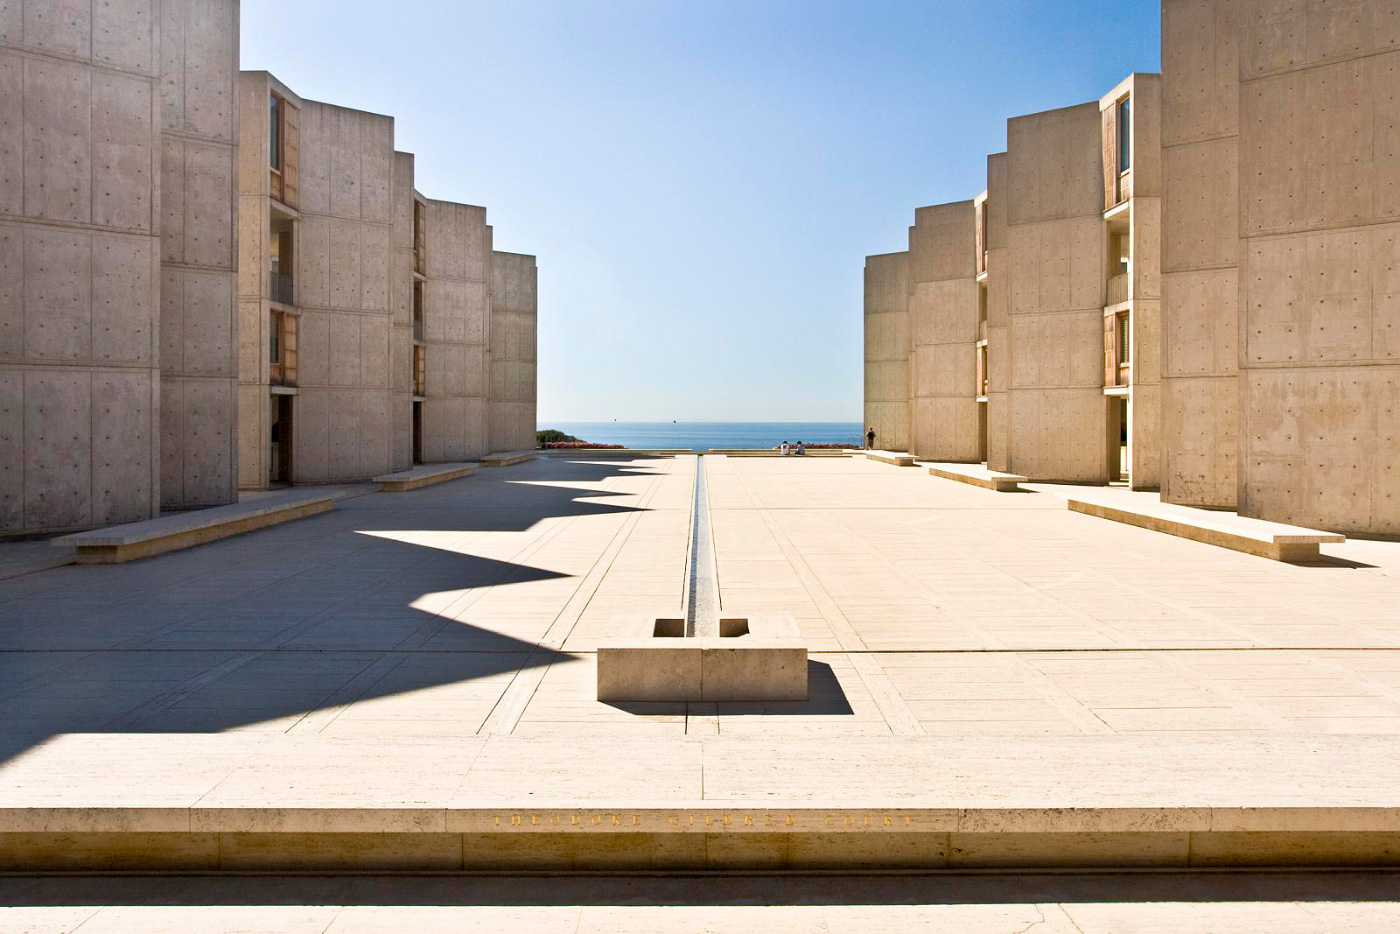 How Louis Kahn's Salk Institute Influenced a Generation of